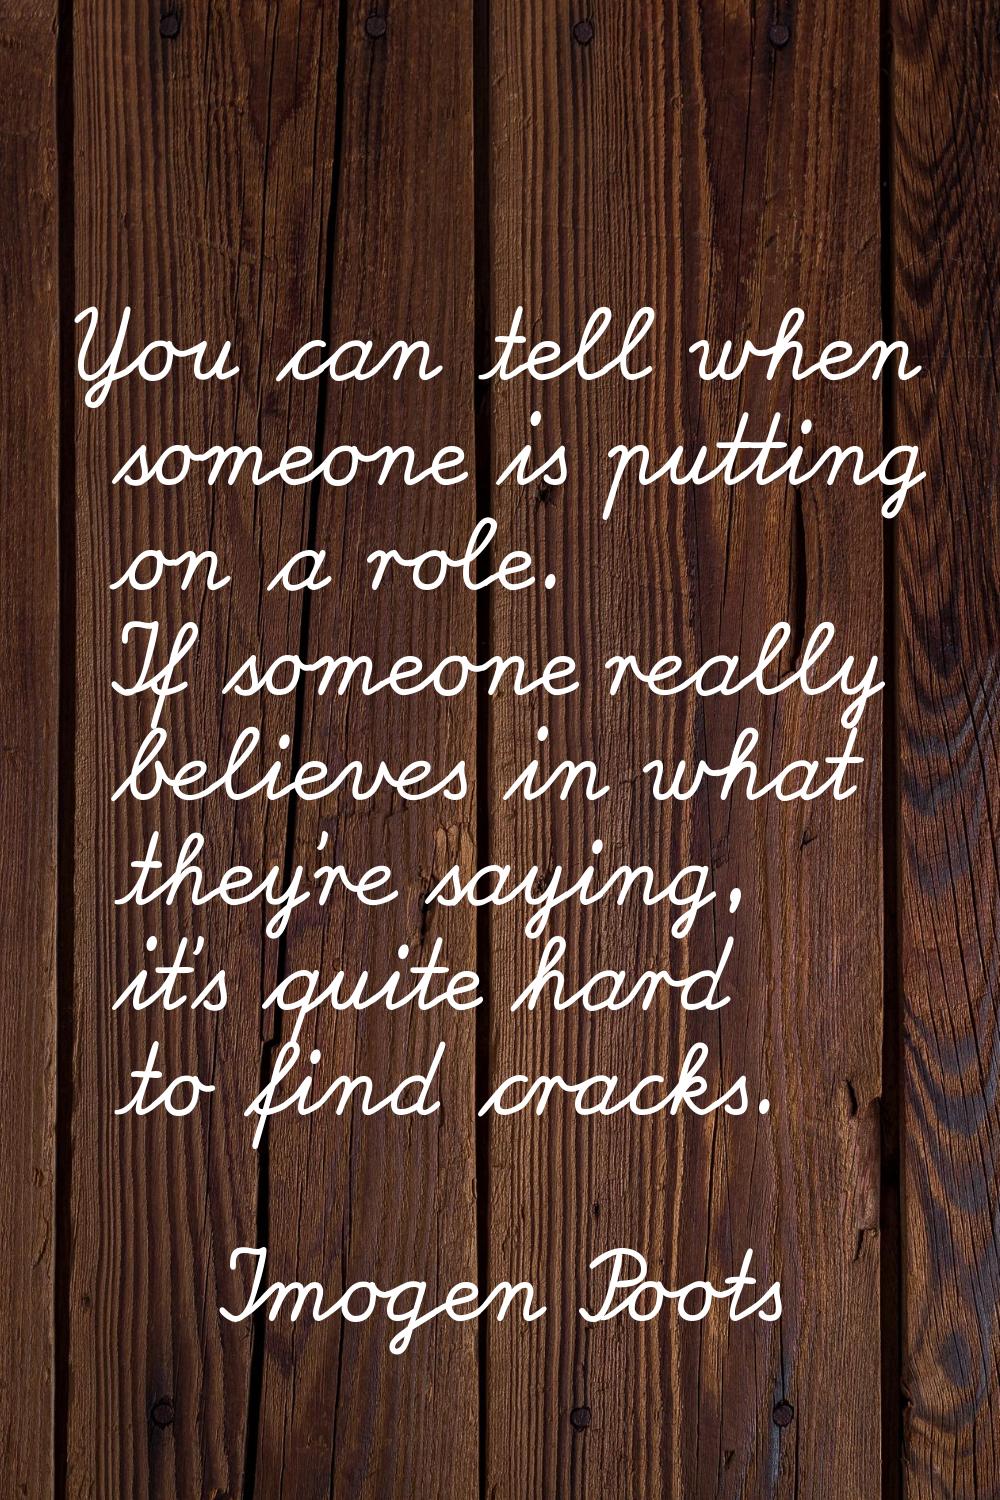 You can tell when someone is putting on a role. If someone really believes in what they're saying, 